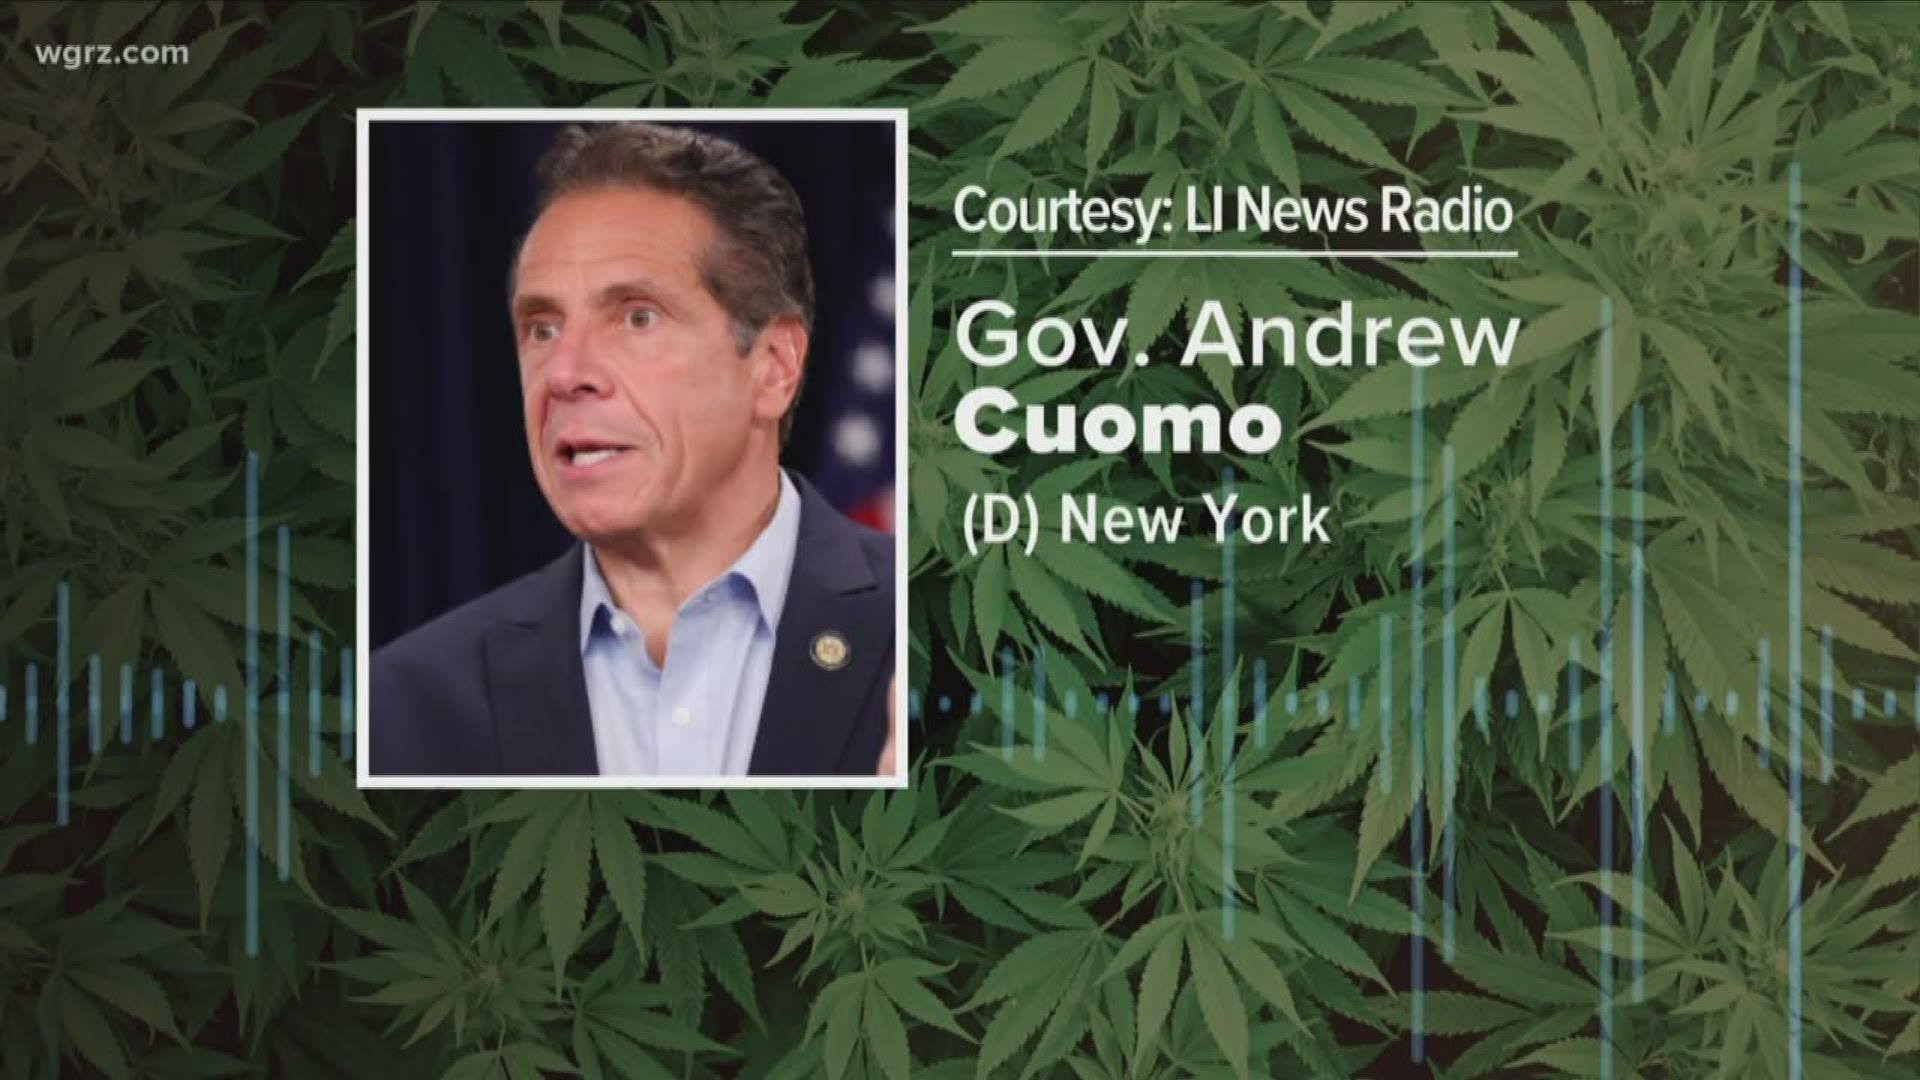 Governor Cuomo talks about the possibility of legalizing recreational marijuana.